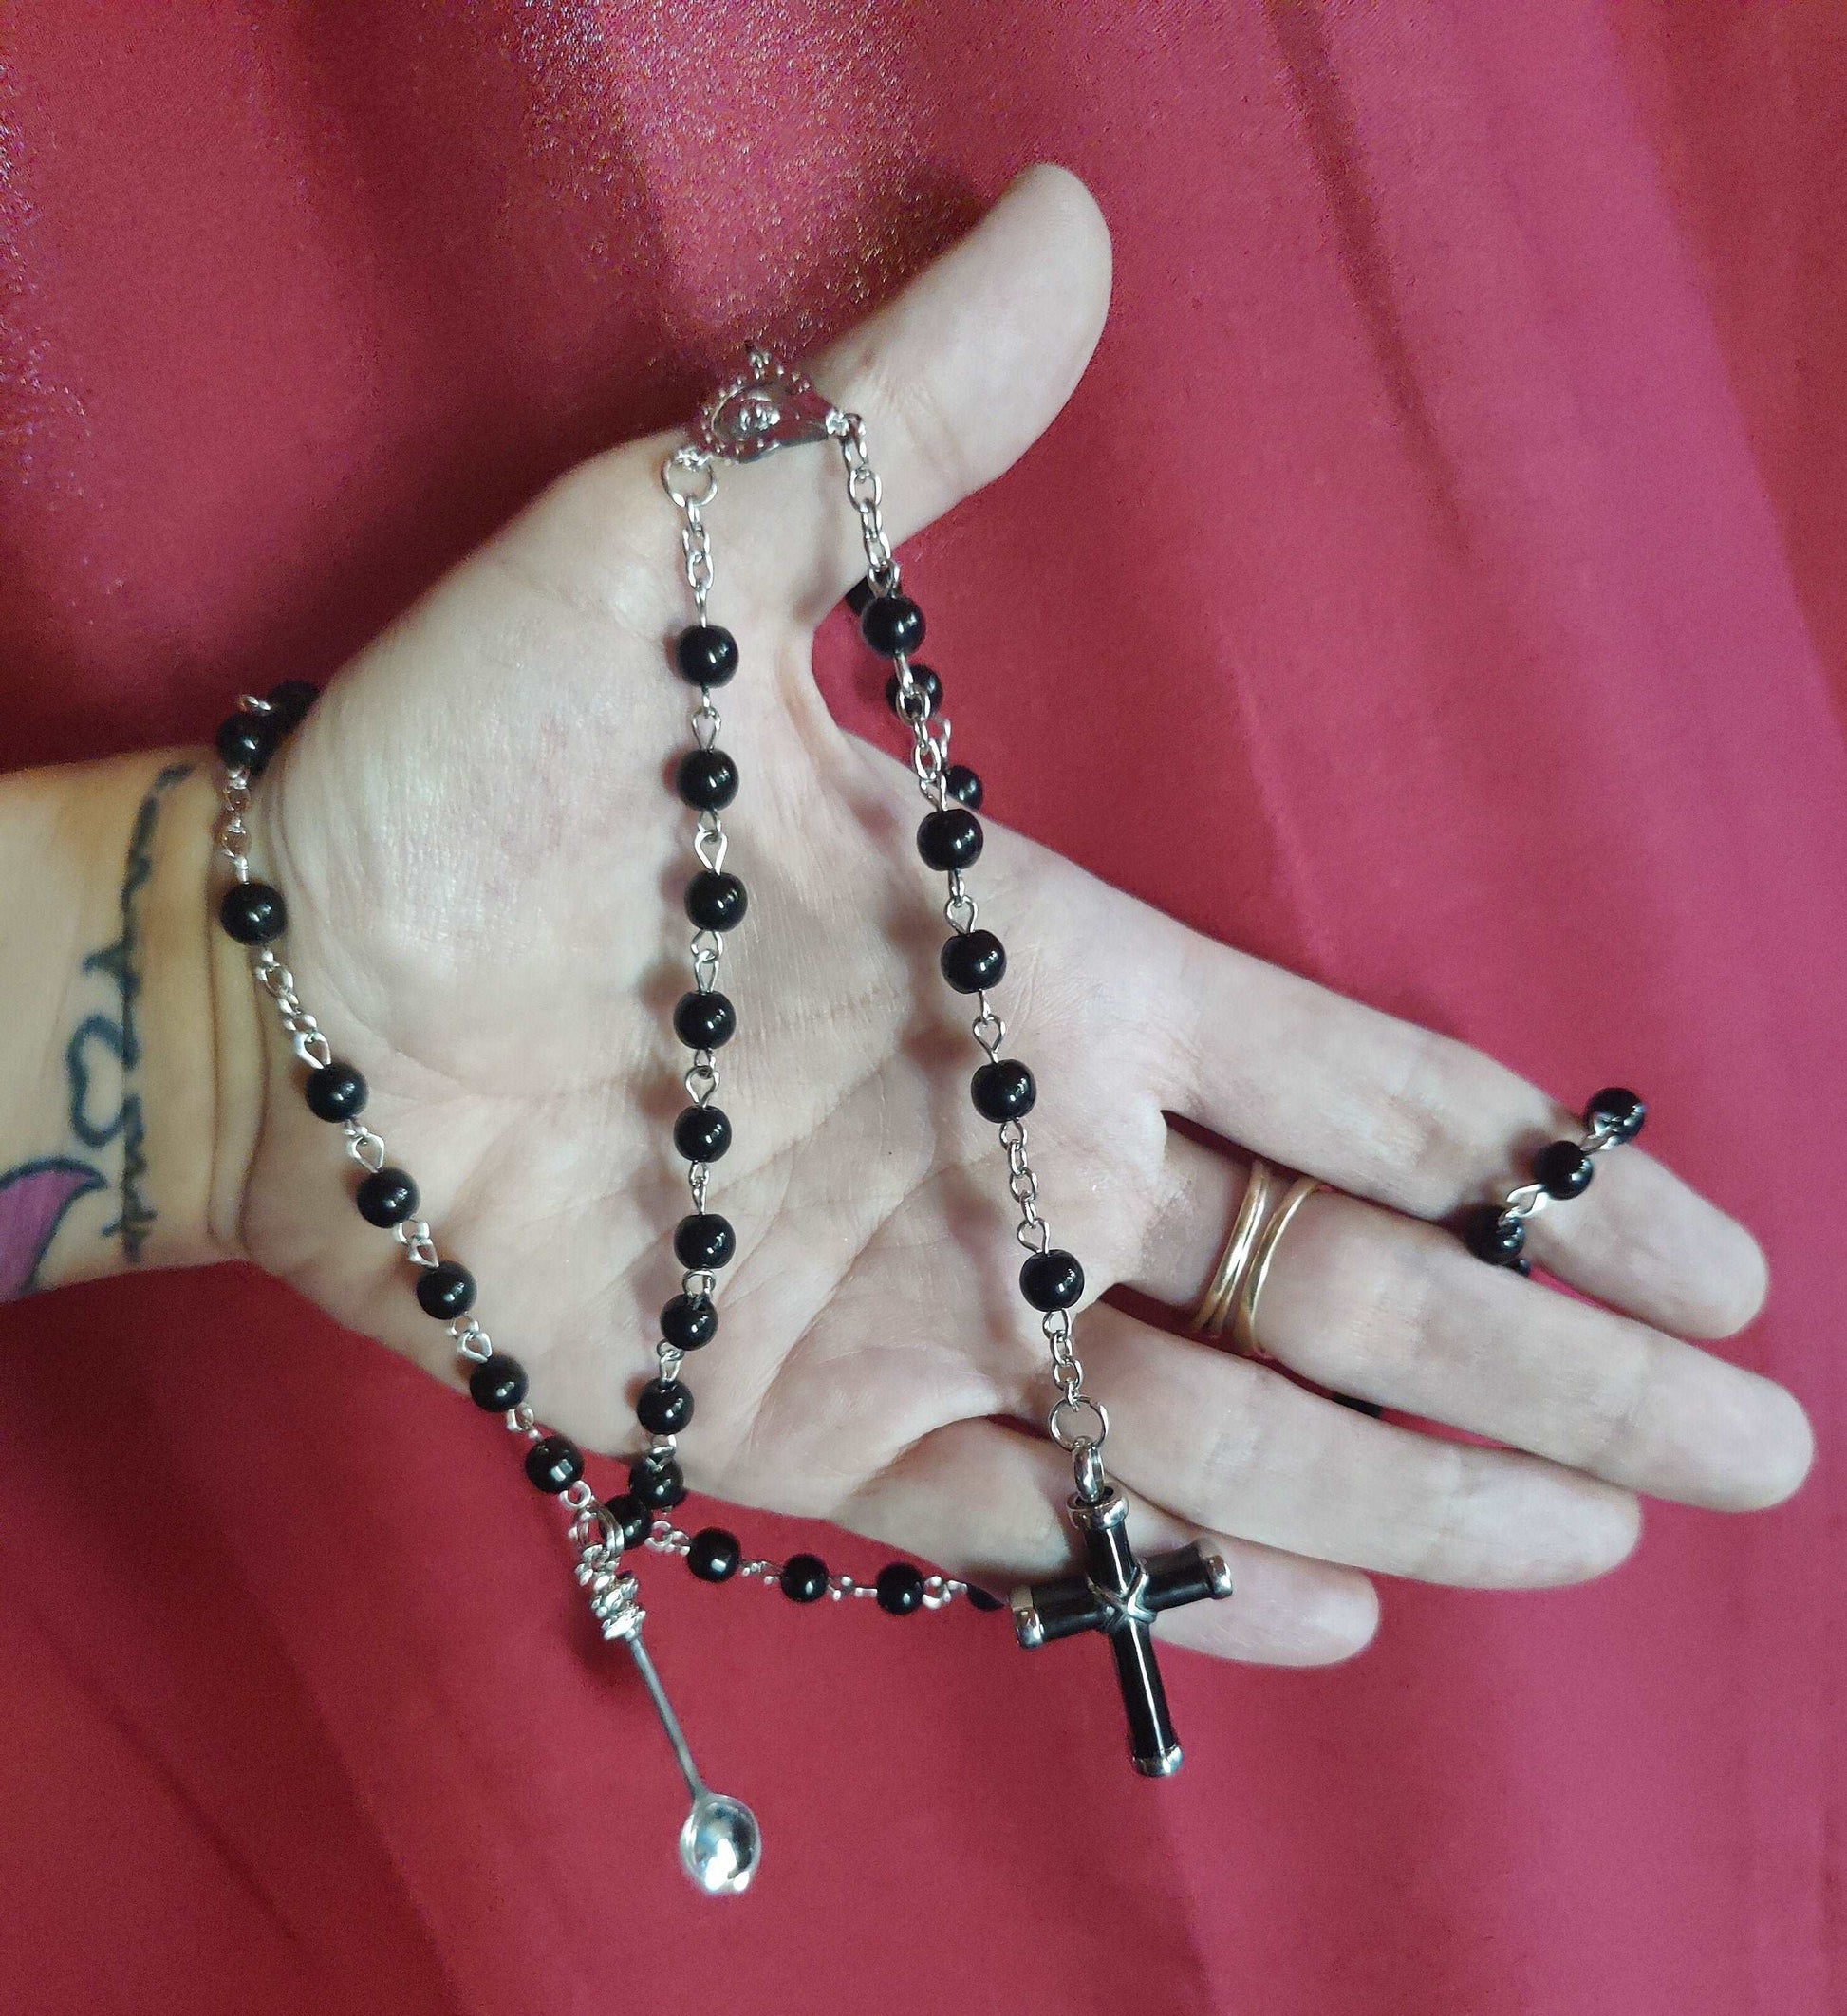 Cruel Intentions Rosary Necklaces - Close Up 